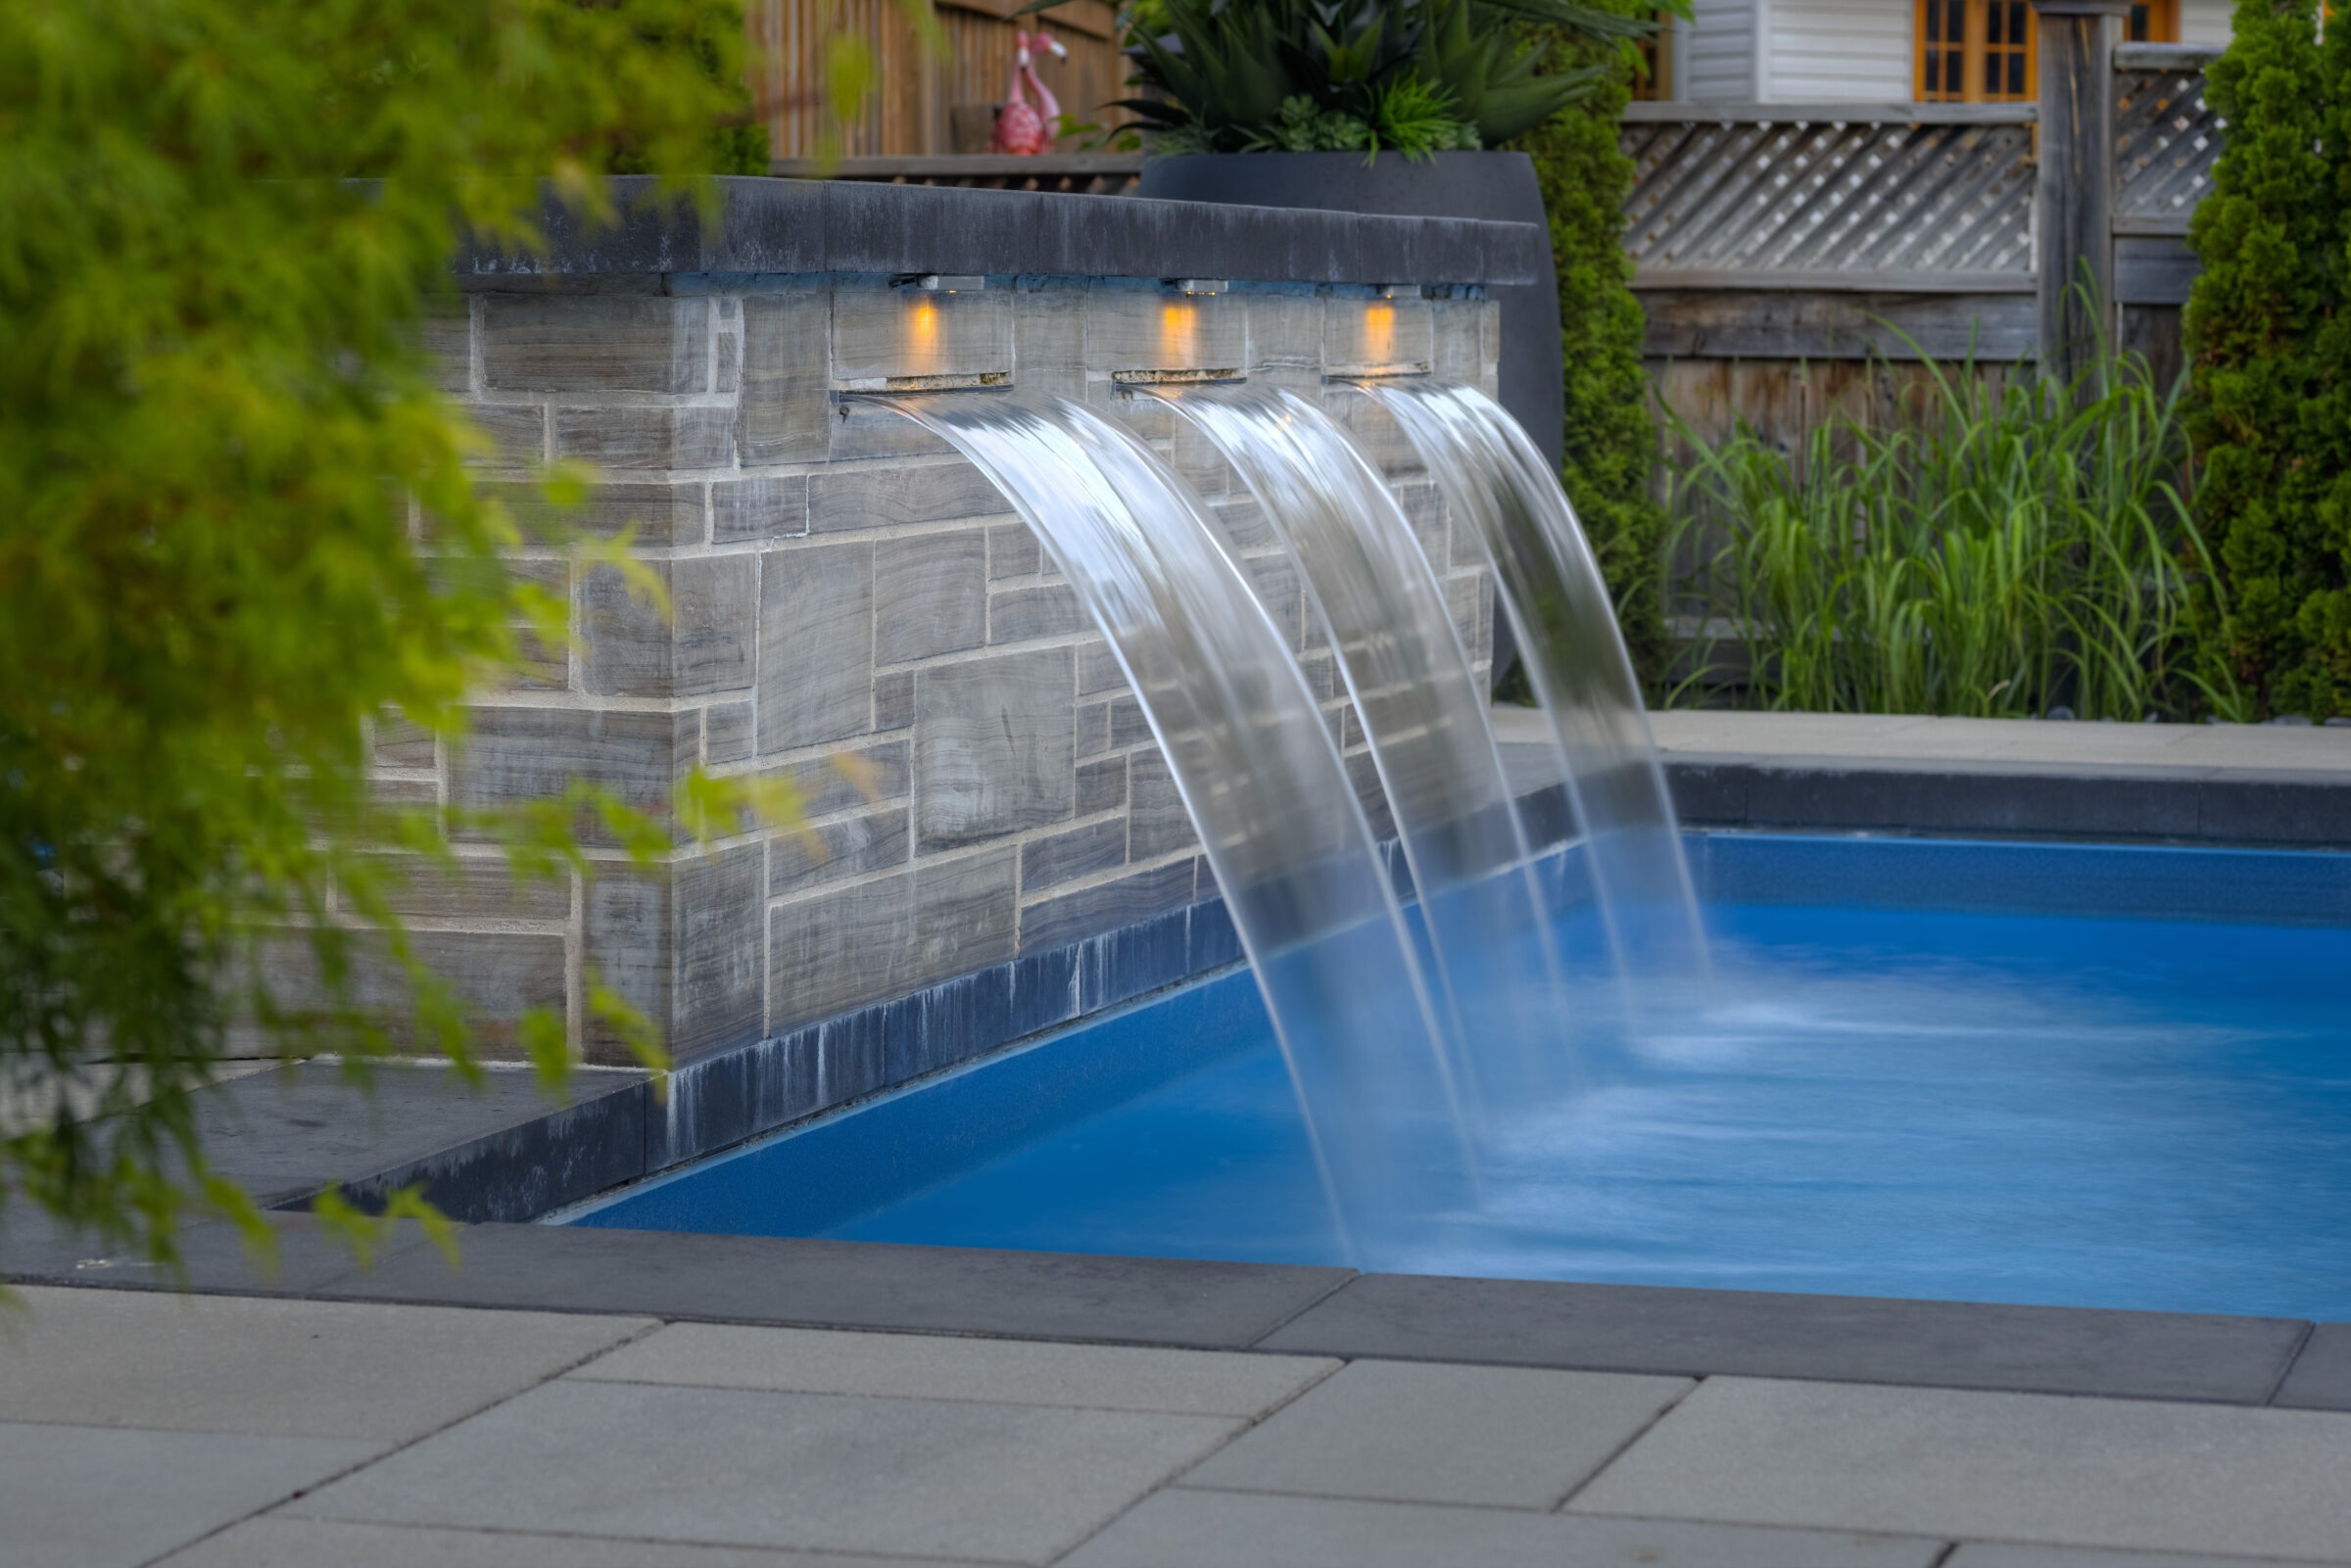 A serene backyard featuring a pool with a stone waterfall feature. Three arcs of water flow smoothly into the blue water, illuminated by overhead lights.